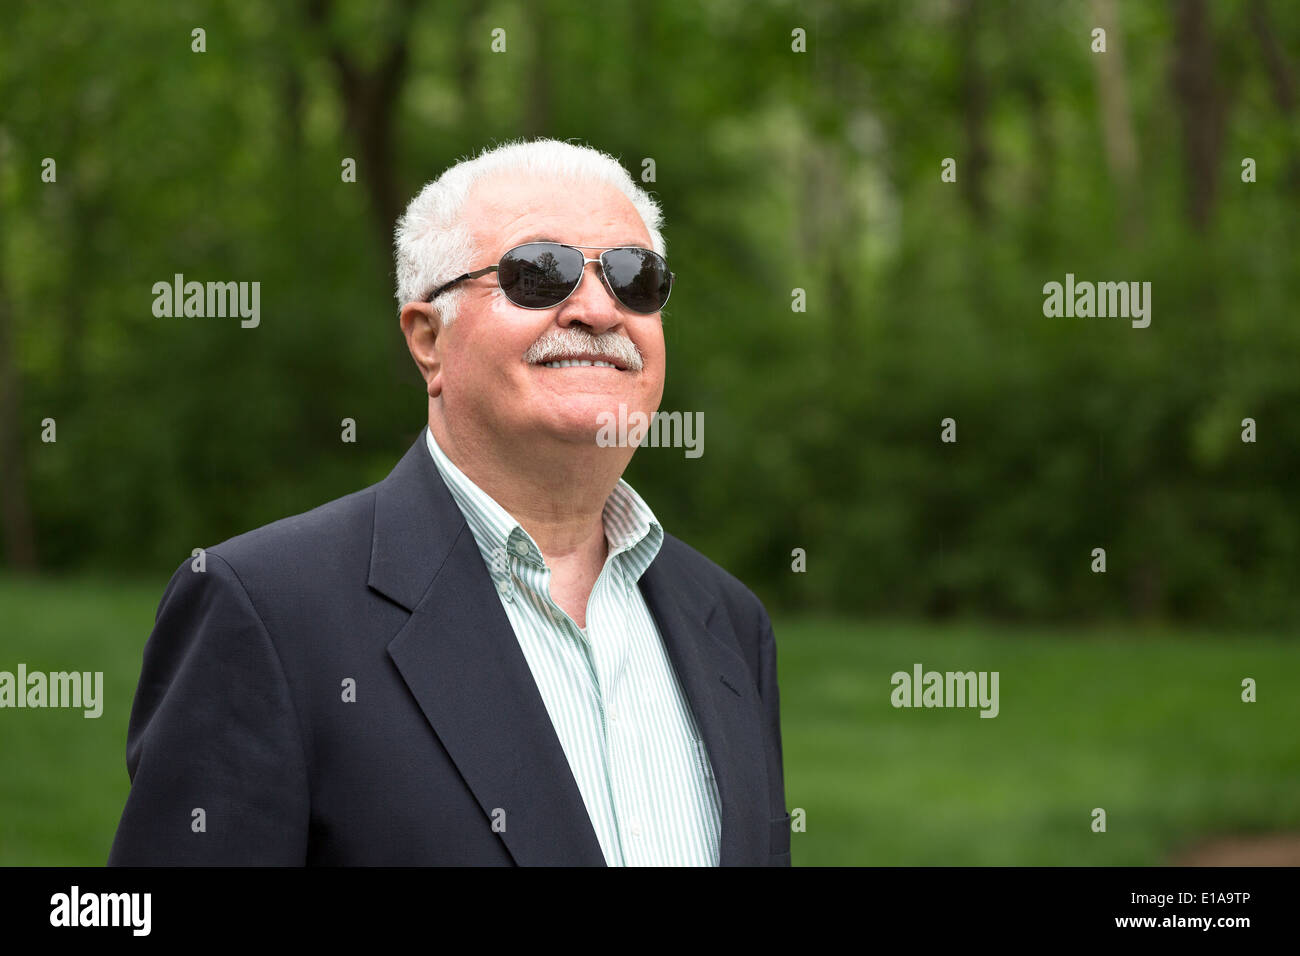 Senior male with grey hair looking up happily and trustfully with his glasses in front of greenery Stock Photo